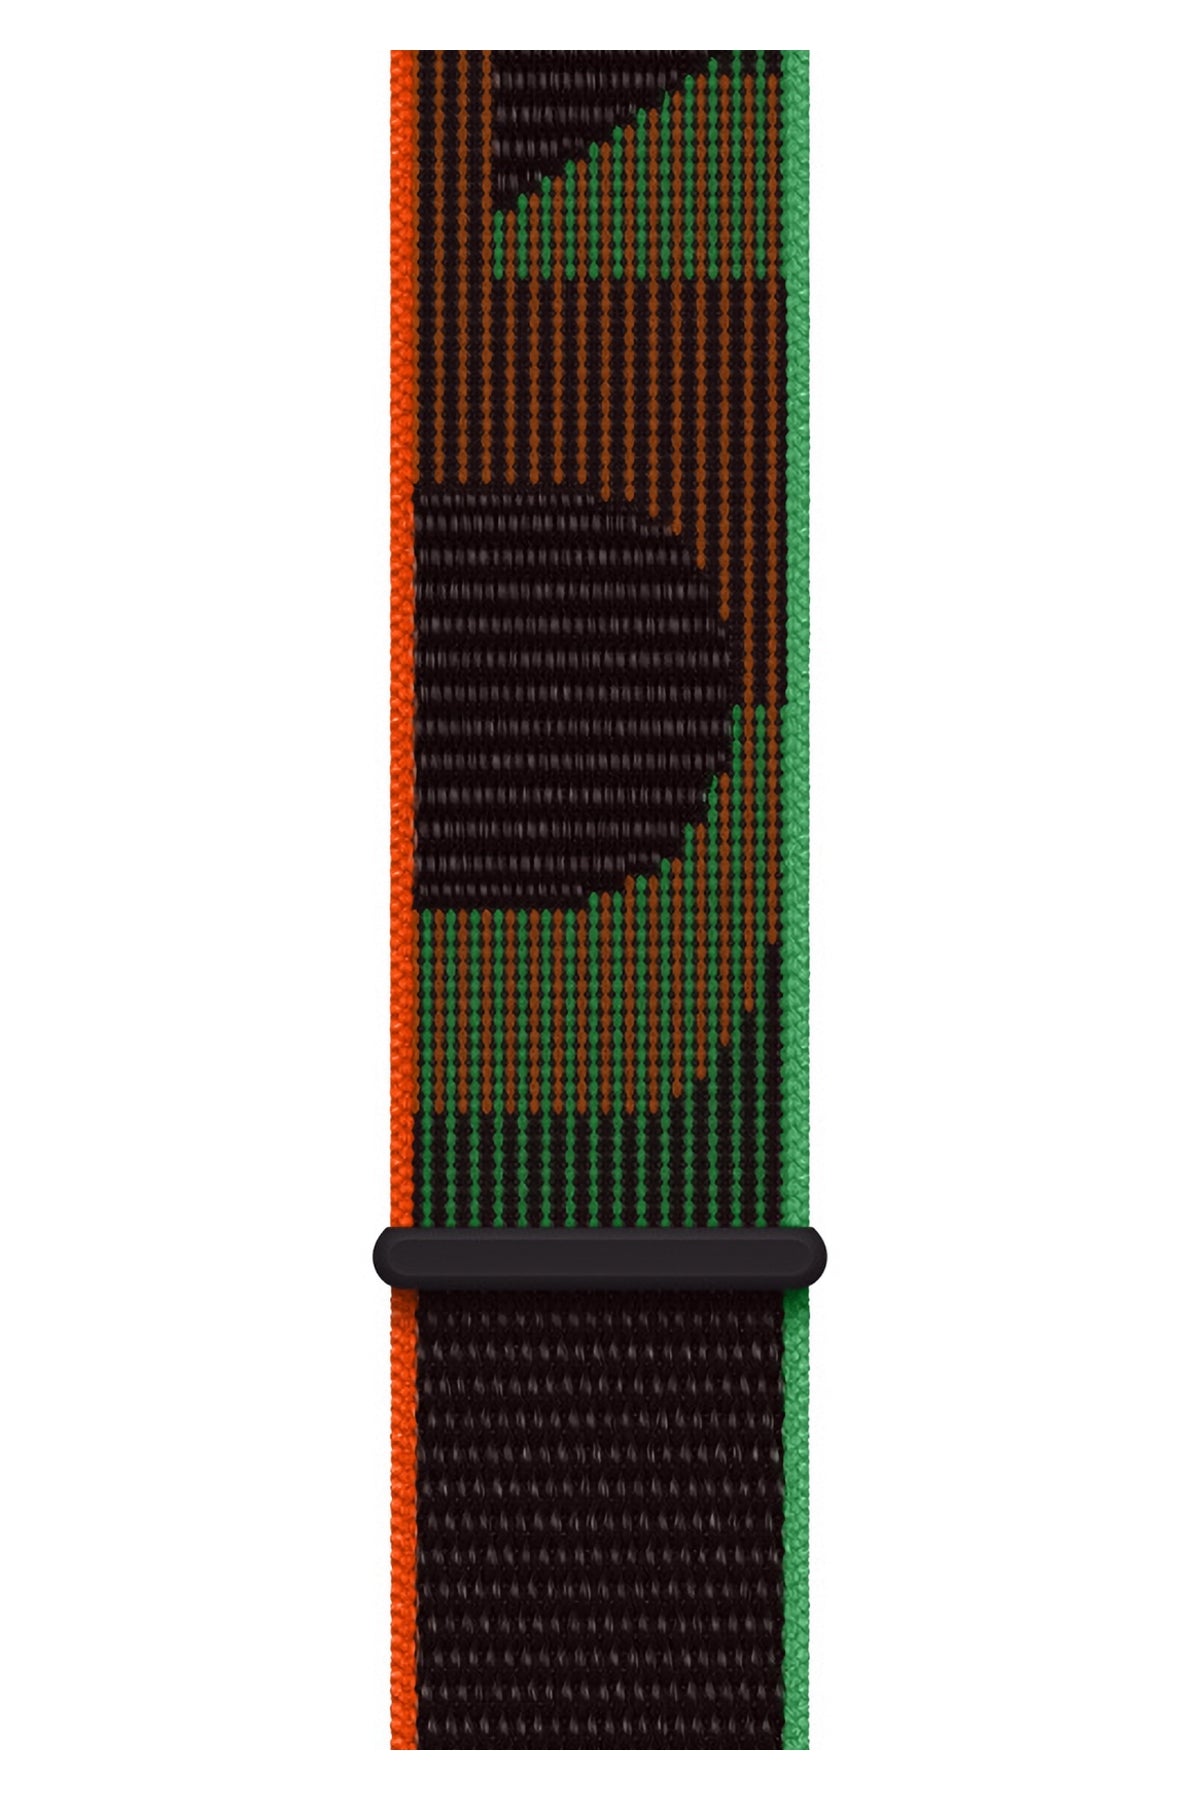 Apple Watch Compatible Sport Loop Band Blackity 